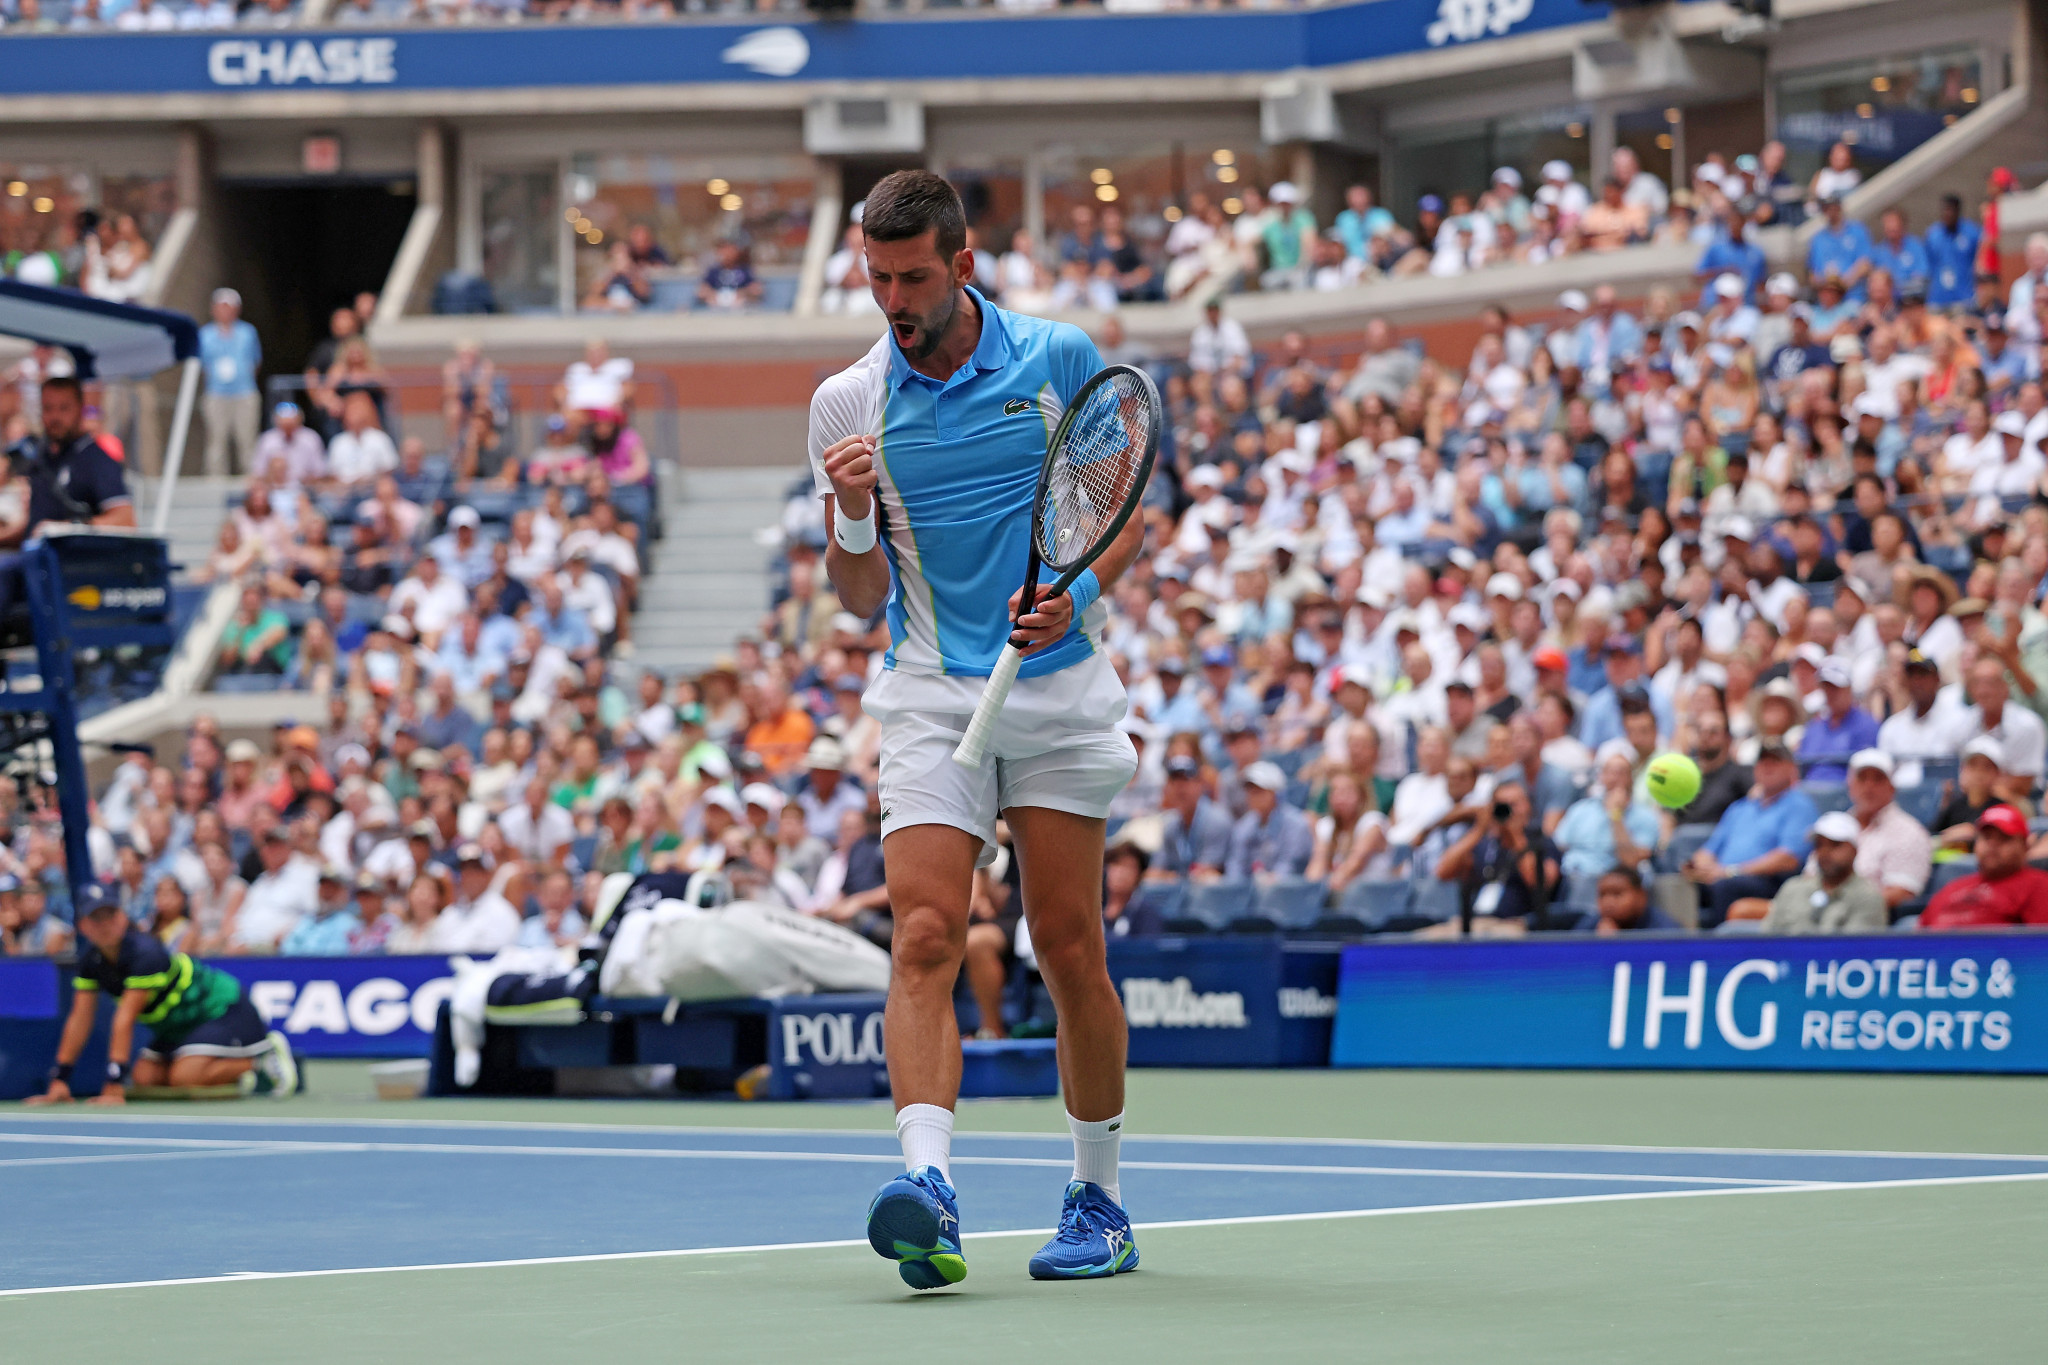 Novak Djokovic secured qualification with a 6-1, 6-4, 6-4 win over Taylor Fritz ©Getty Images